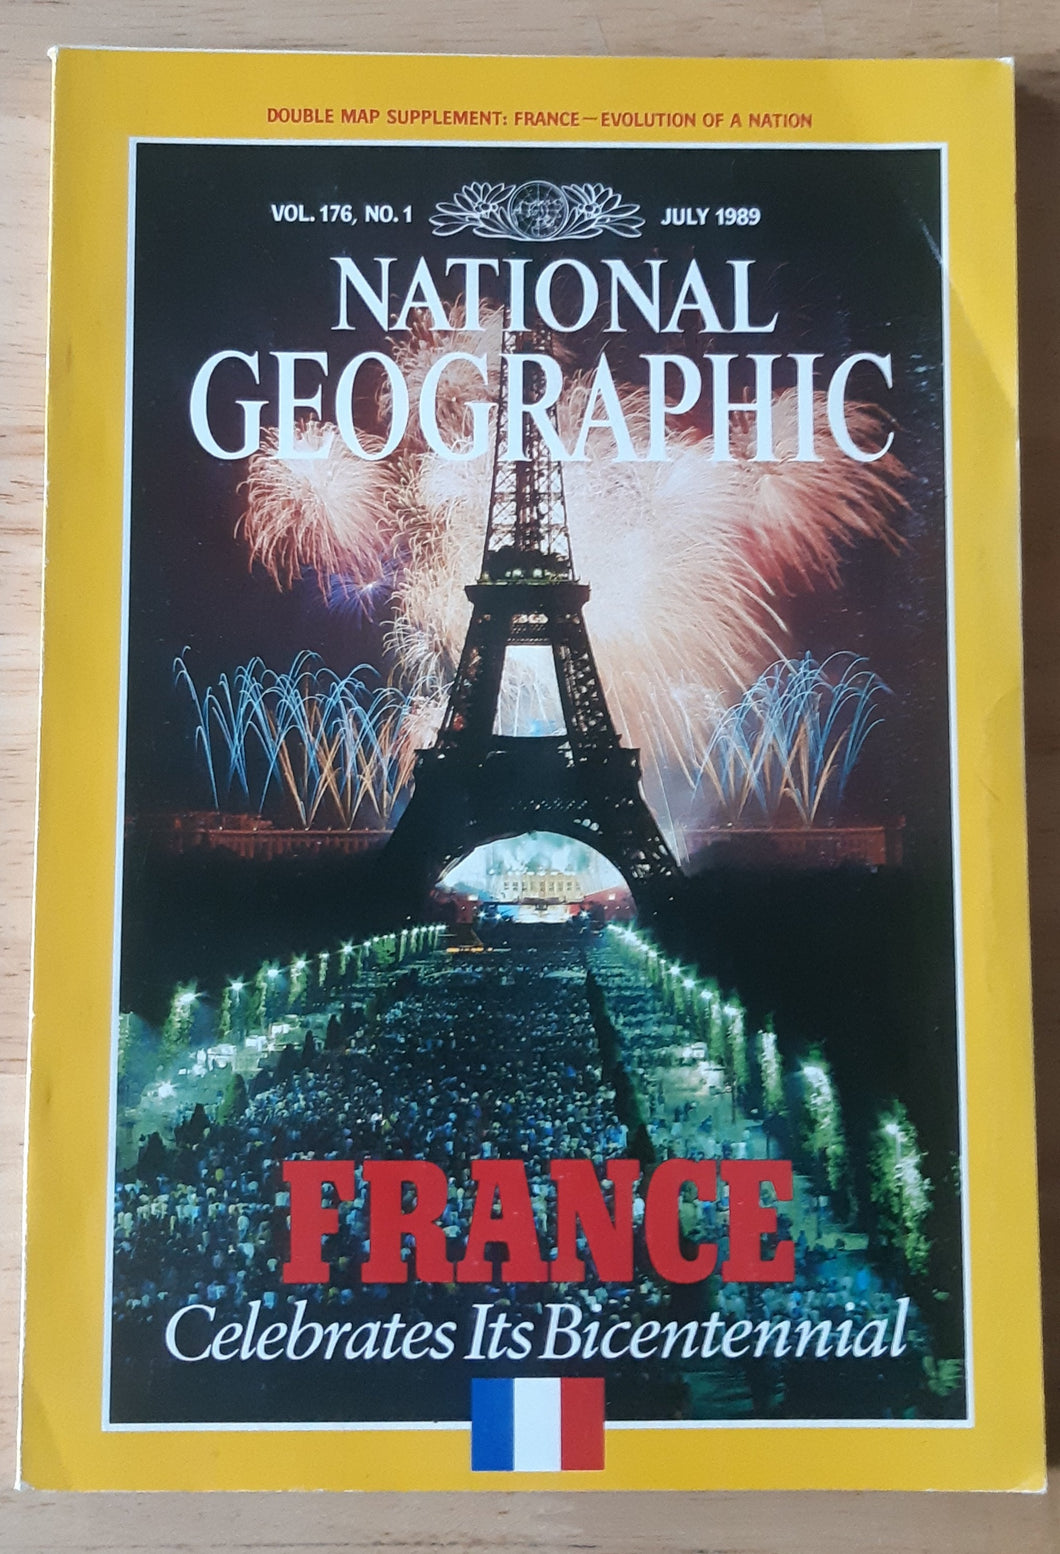 National Geographic - July 1989 (Vol. 176, No. 1)